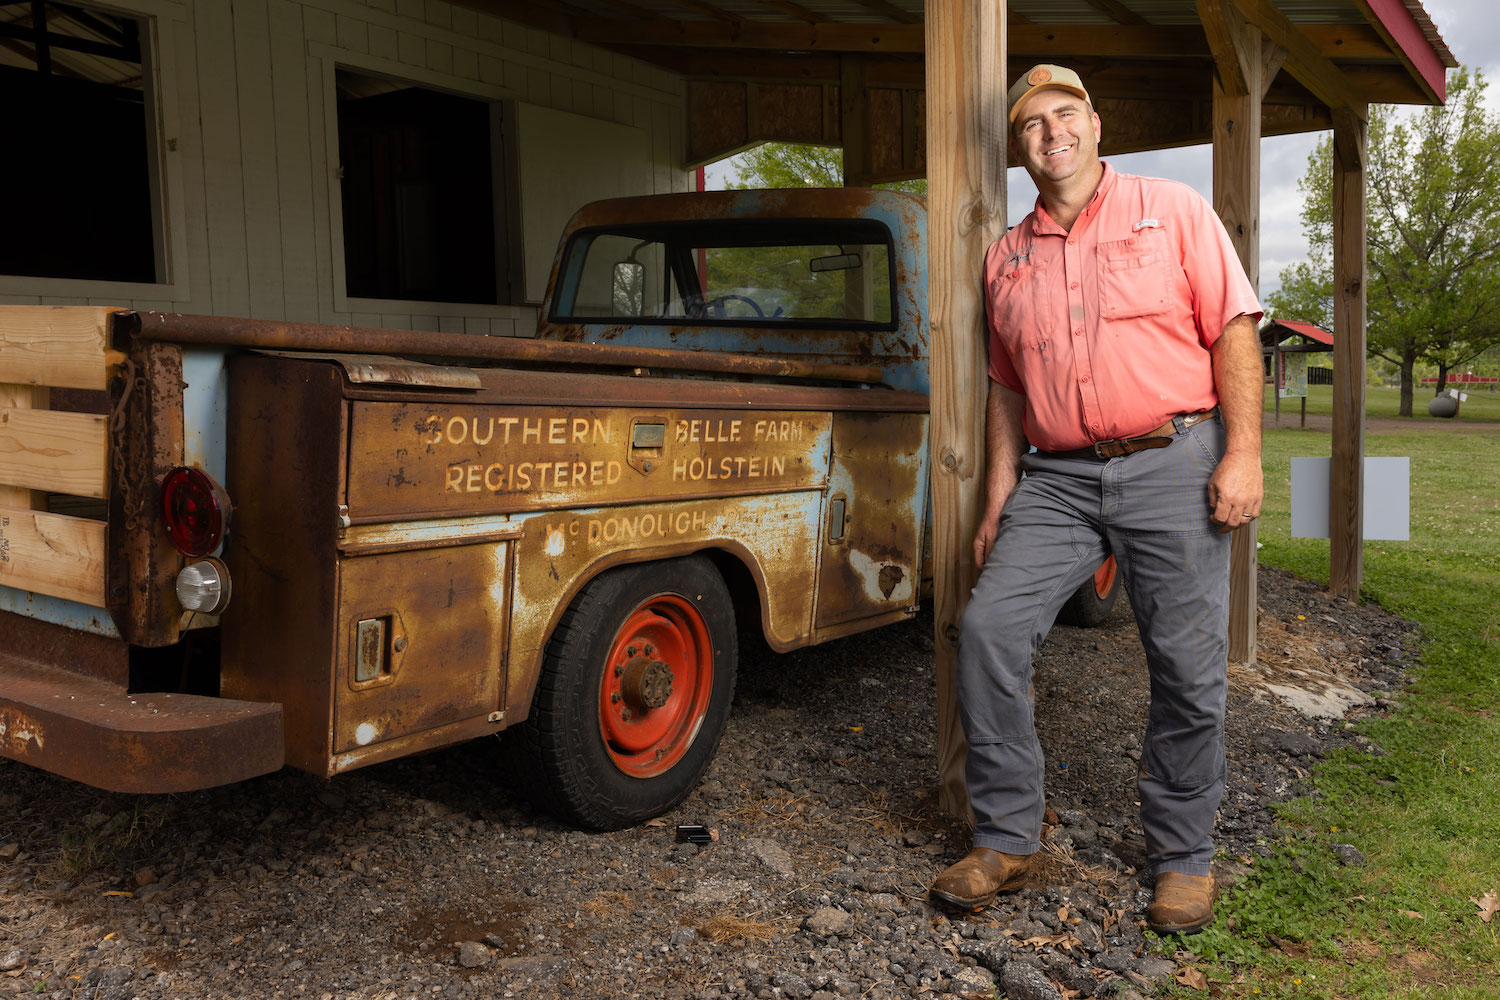 Southern Belle Farm owner Jake Carter (BBA ’03) transformed the fifth-generation family dairy and cattle farm into a tourist destination